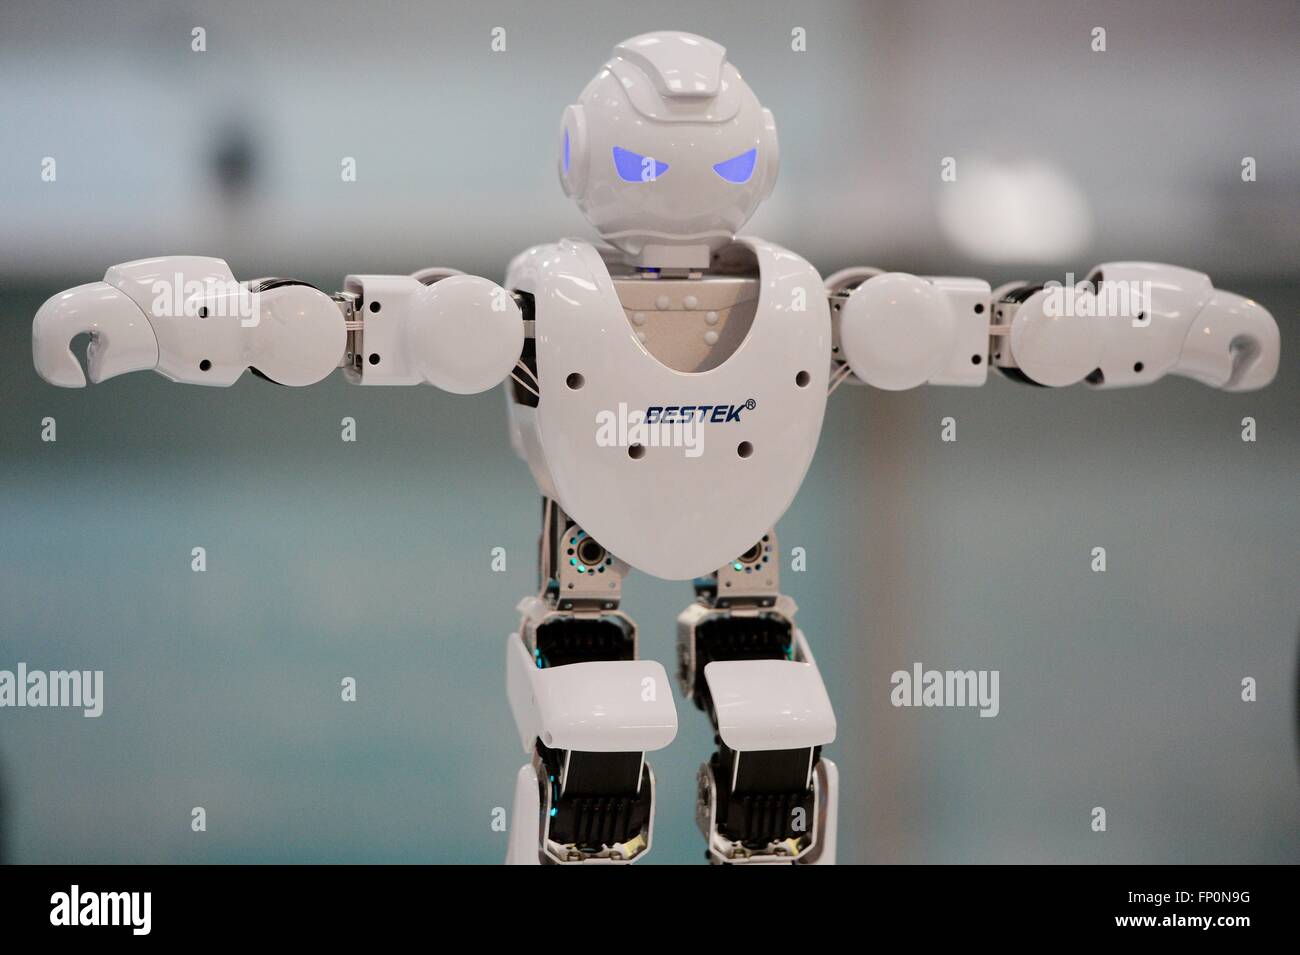 A Robot at the trade fair CeBit, Germany, city of Hannover, 16. March 2016. Photo: Frank May Stock Photo